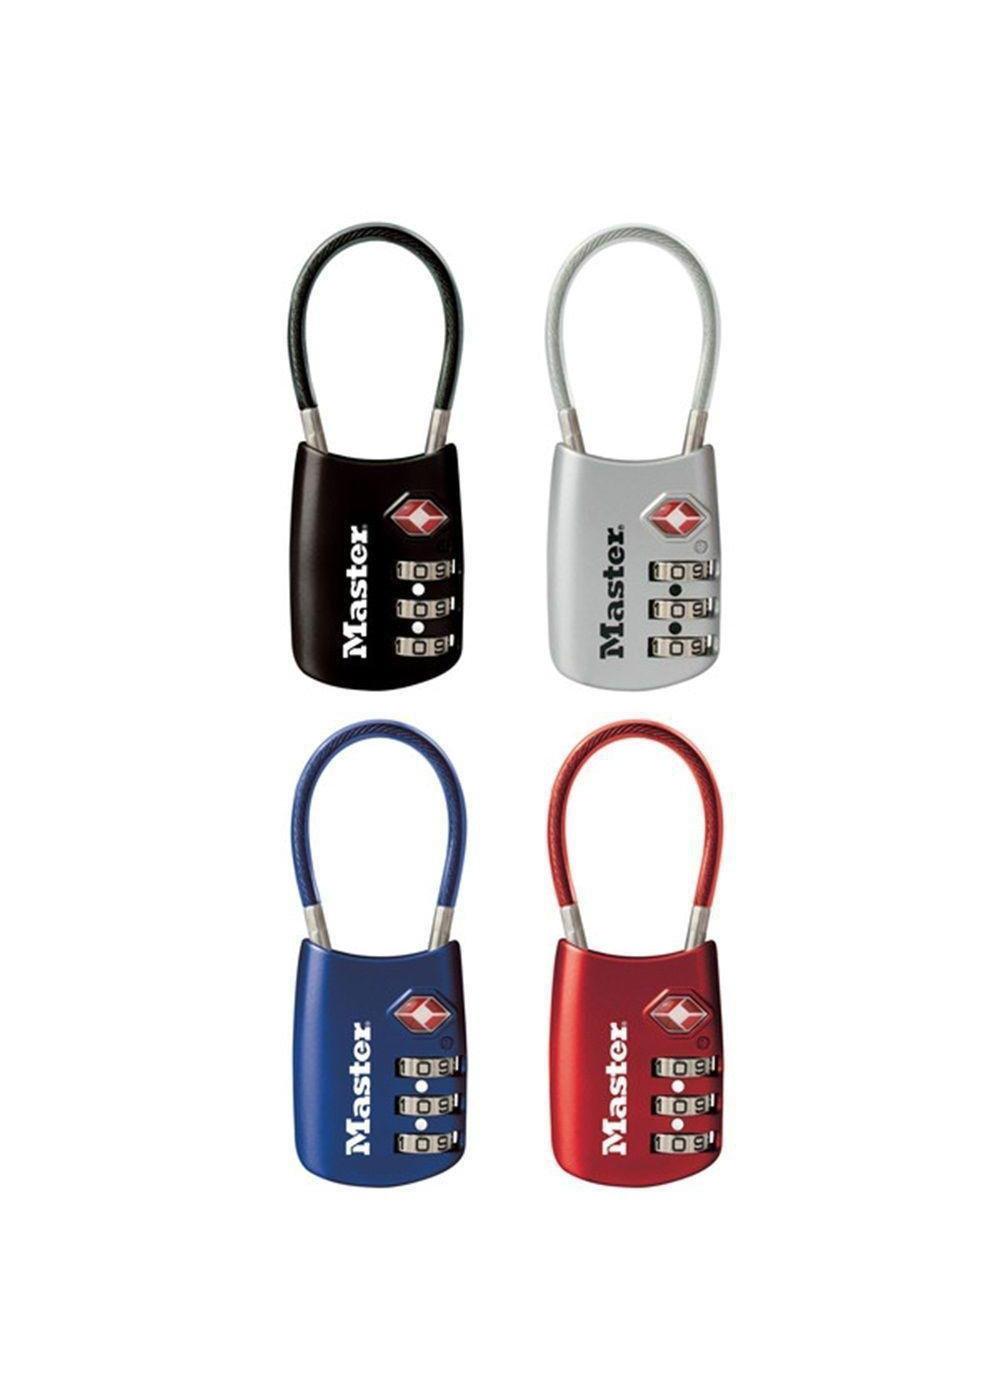 Master Lock 4688D TSA-Approved Luggage Lock - Assorted; image 3 of 5